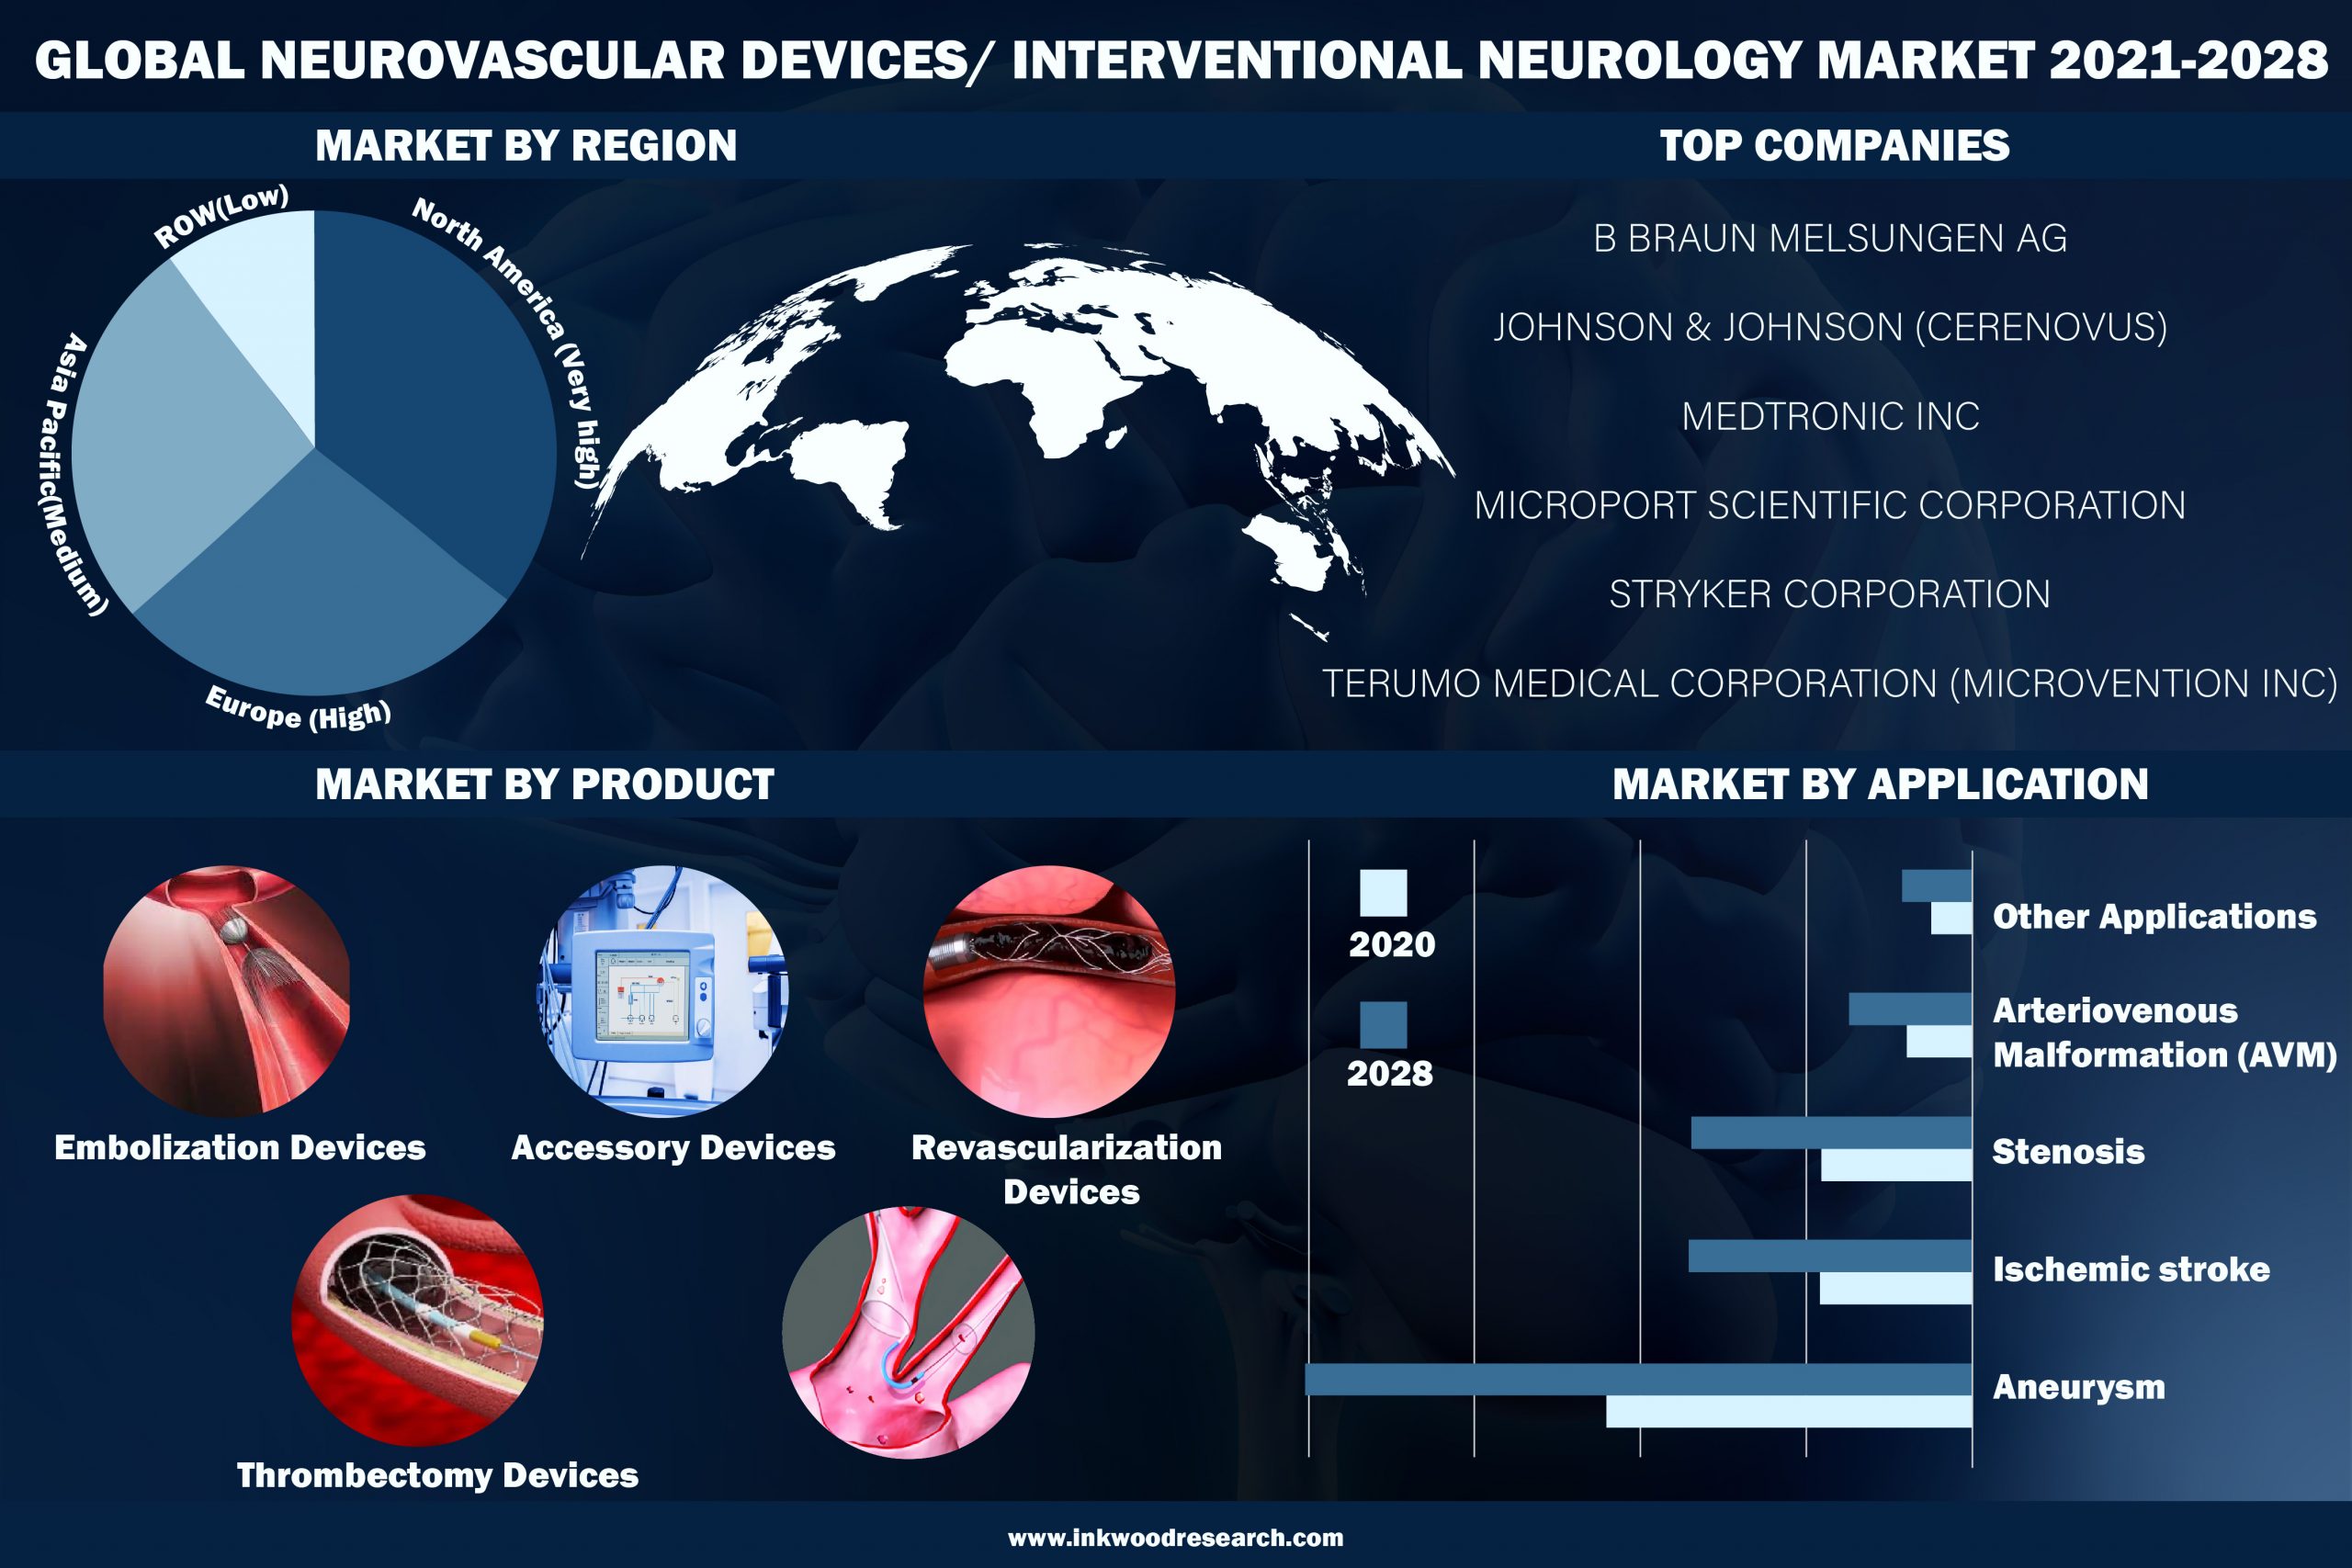 Global Neurovascular Devices/Interventional Neurology Market to Progress with Surging Adult Populace